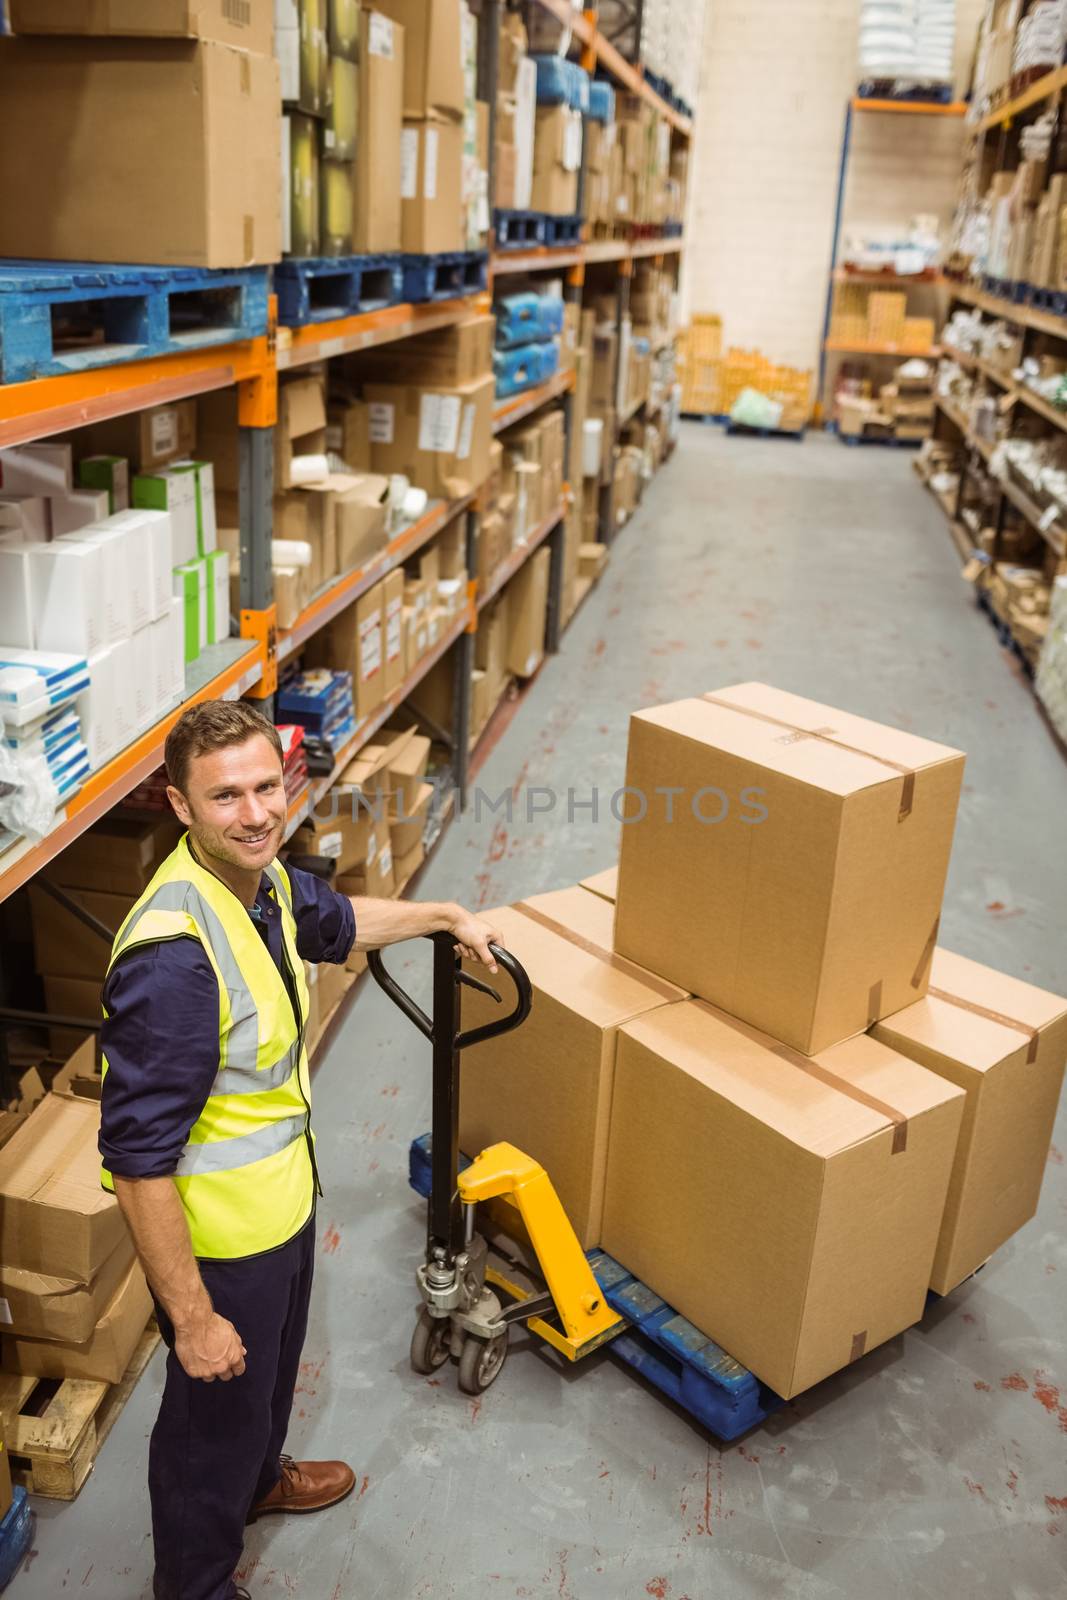 Worker with trolley of boxes smiling at camera in a large warehouse